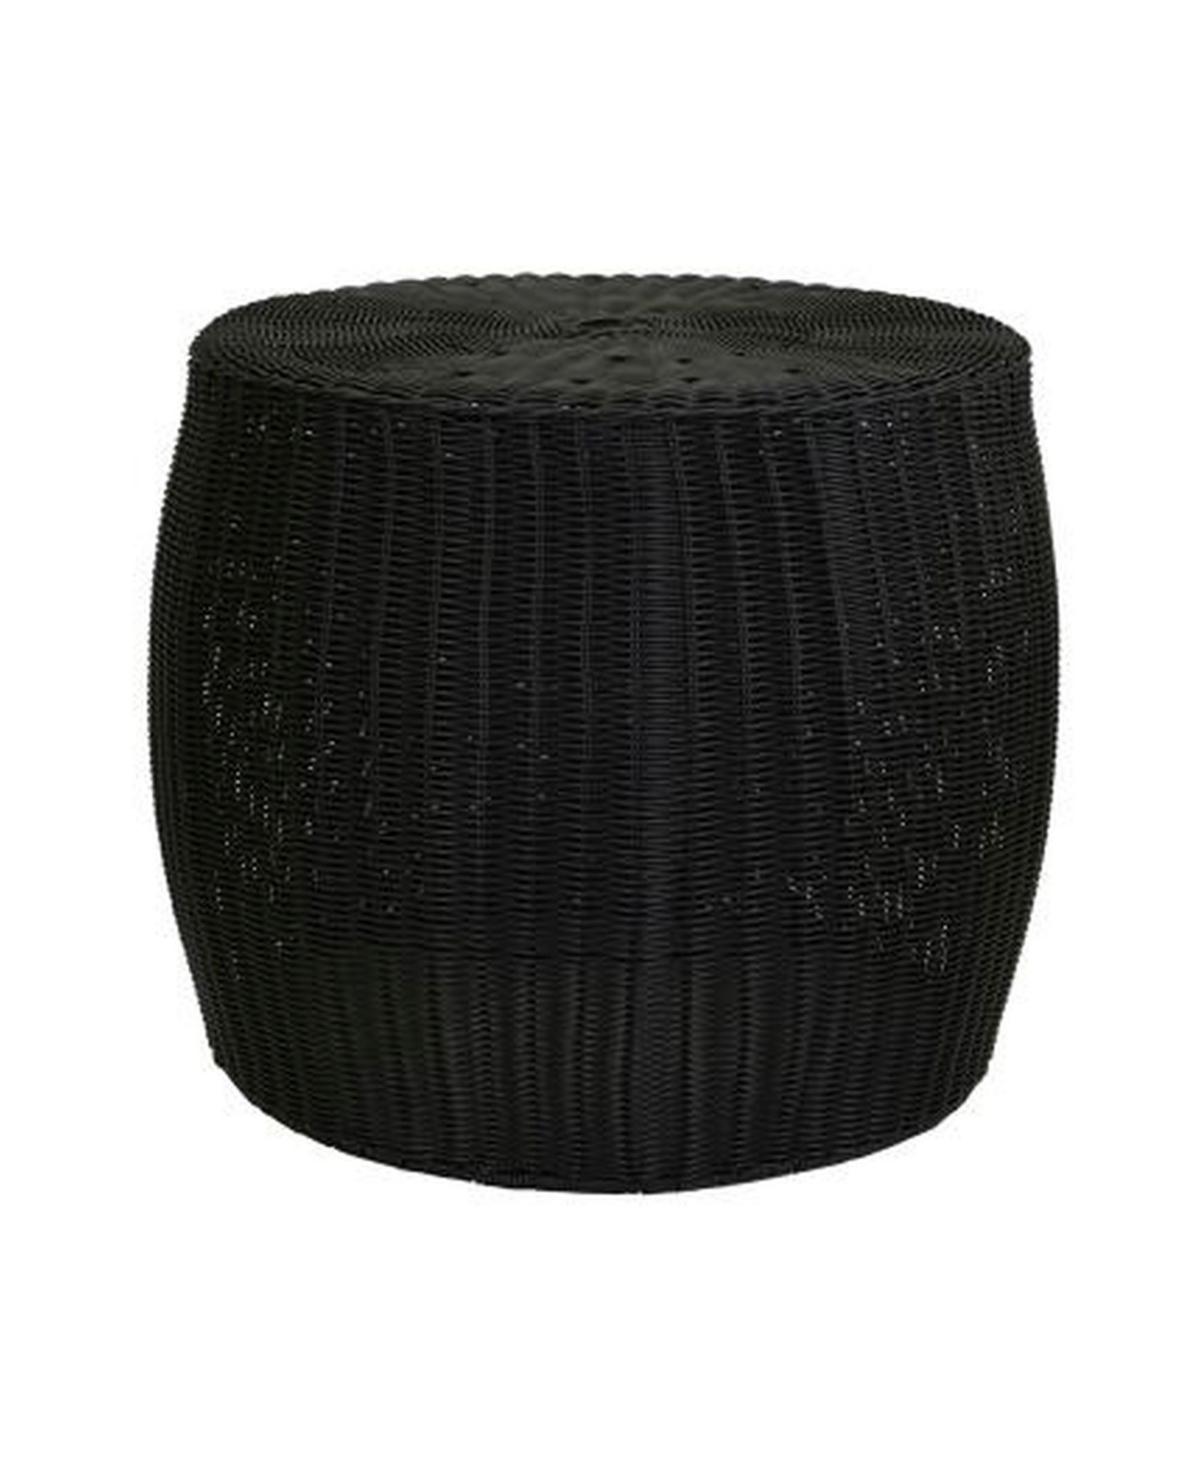 Household Essentials Resin Wicker Side Table, Accent Table Or Storage Container In Black